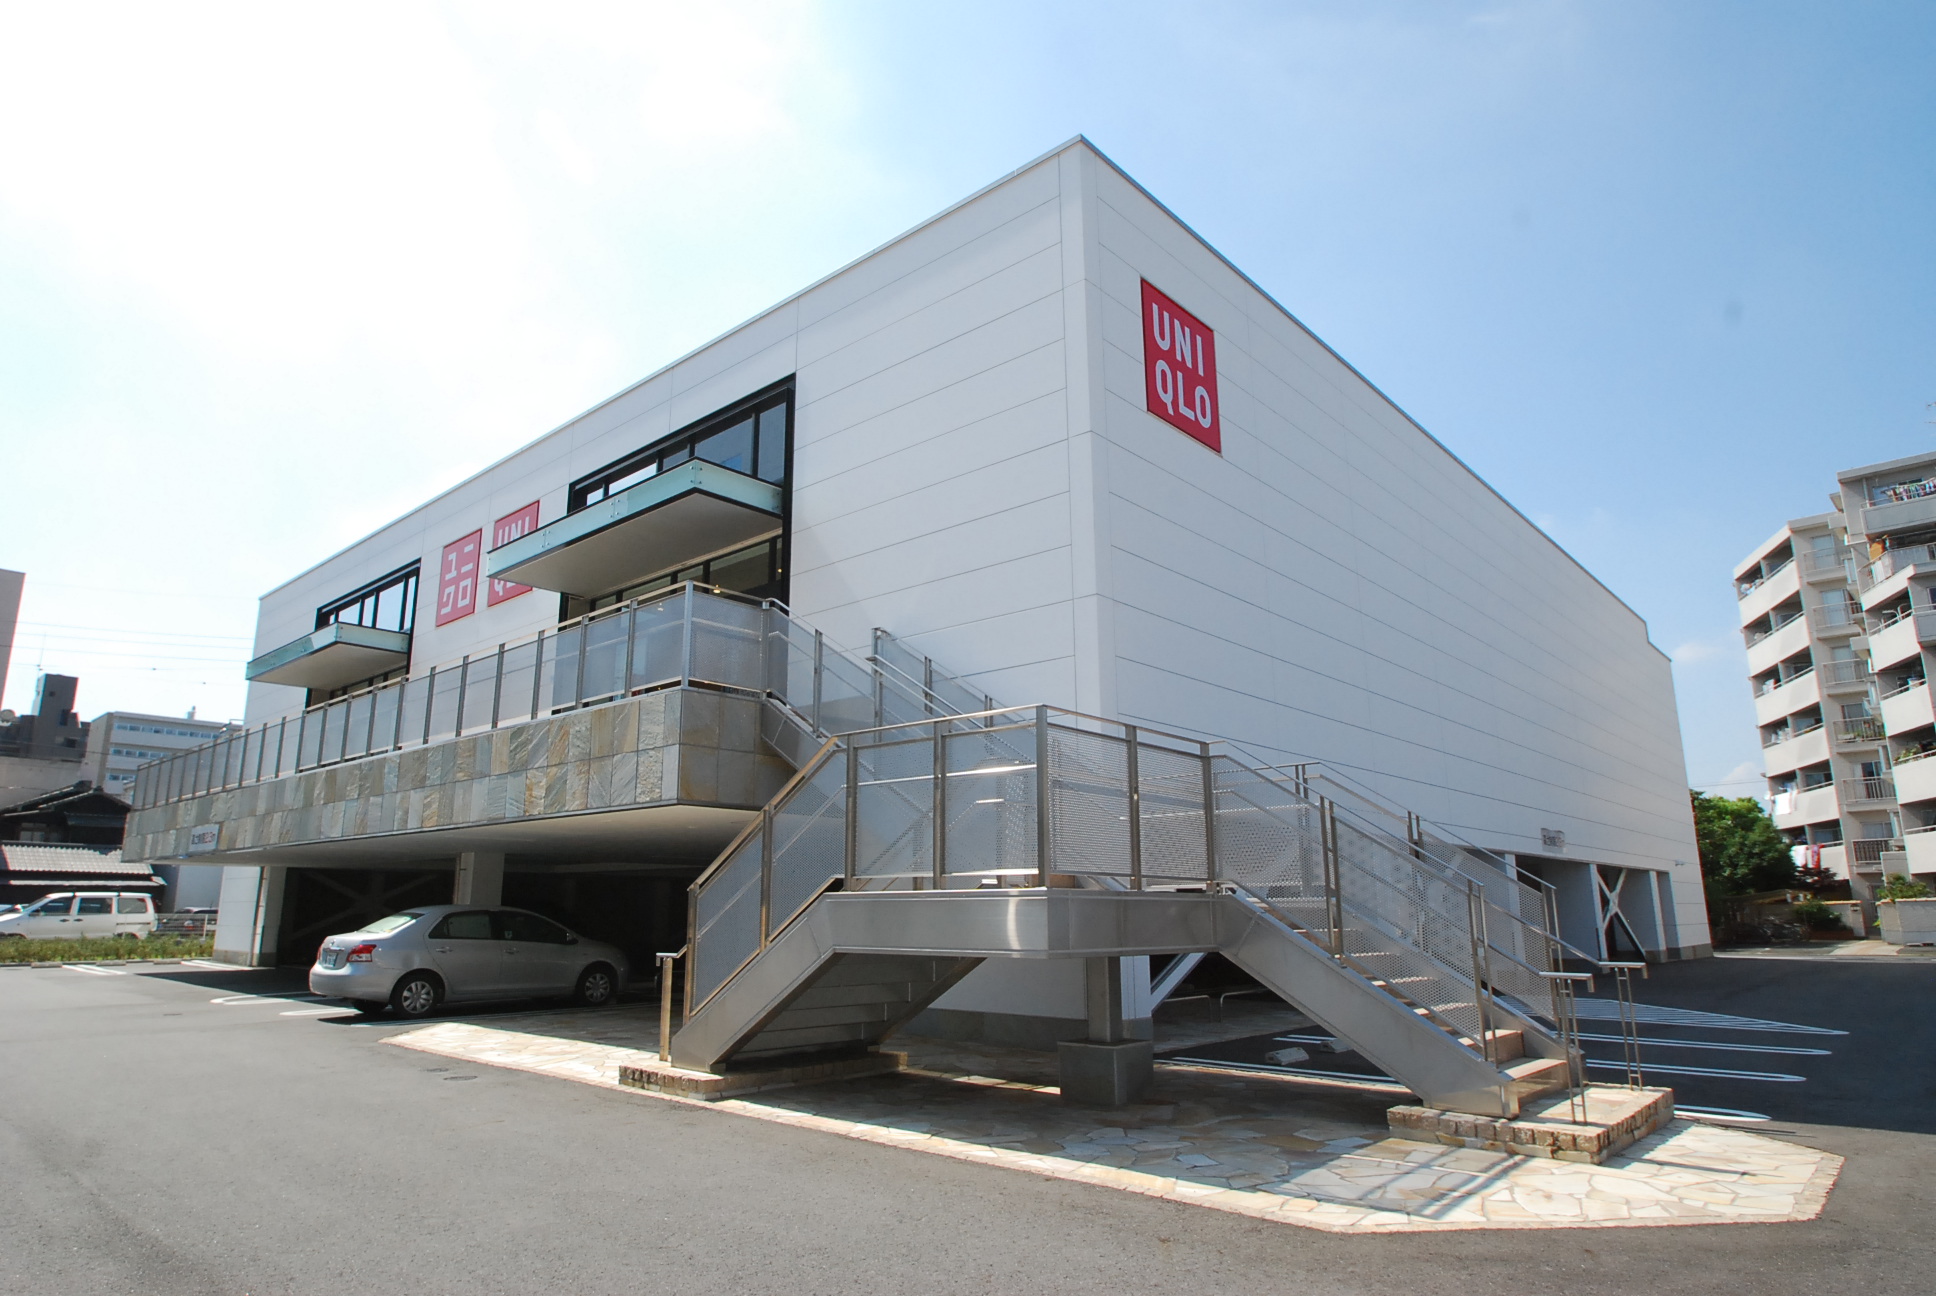 Shopping centre. 913m to UNIQLO white-walled shop (shopping center)